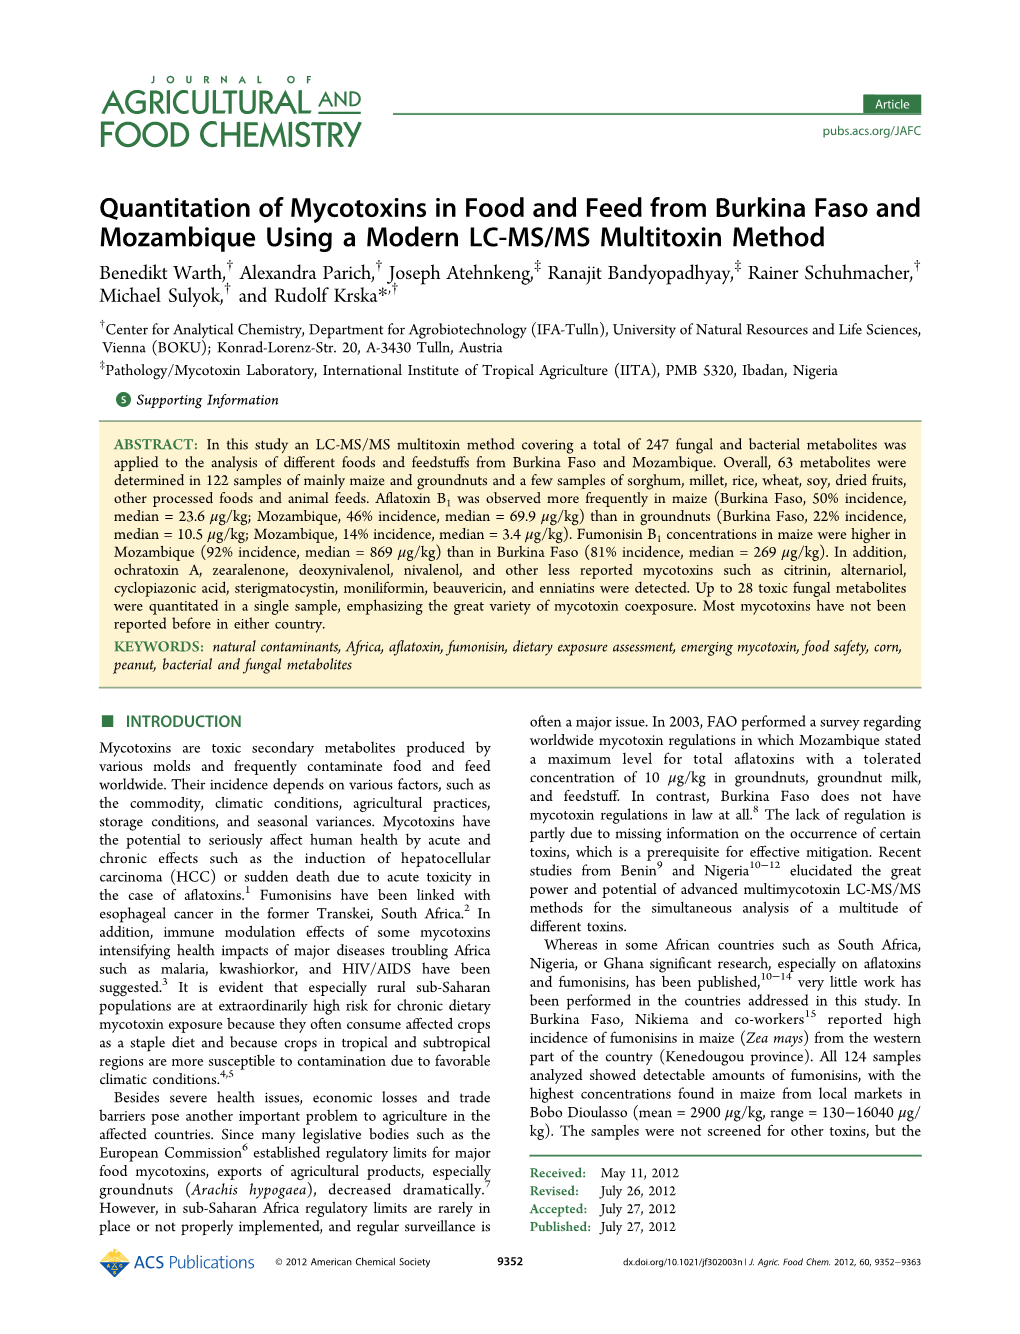 Quantitation of Mycotoxins in Food and Feed from Burkina Faso And